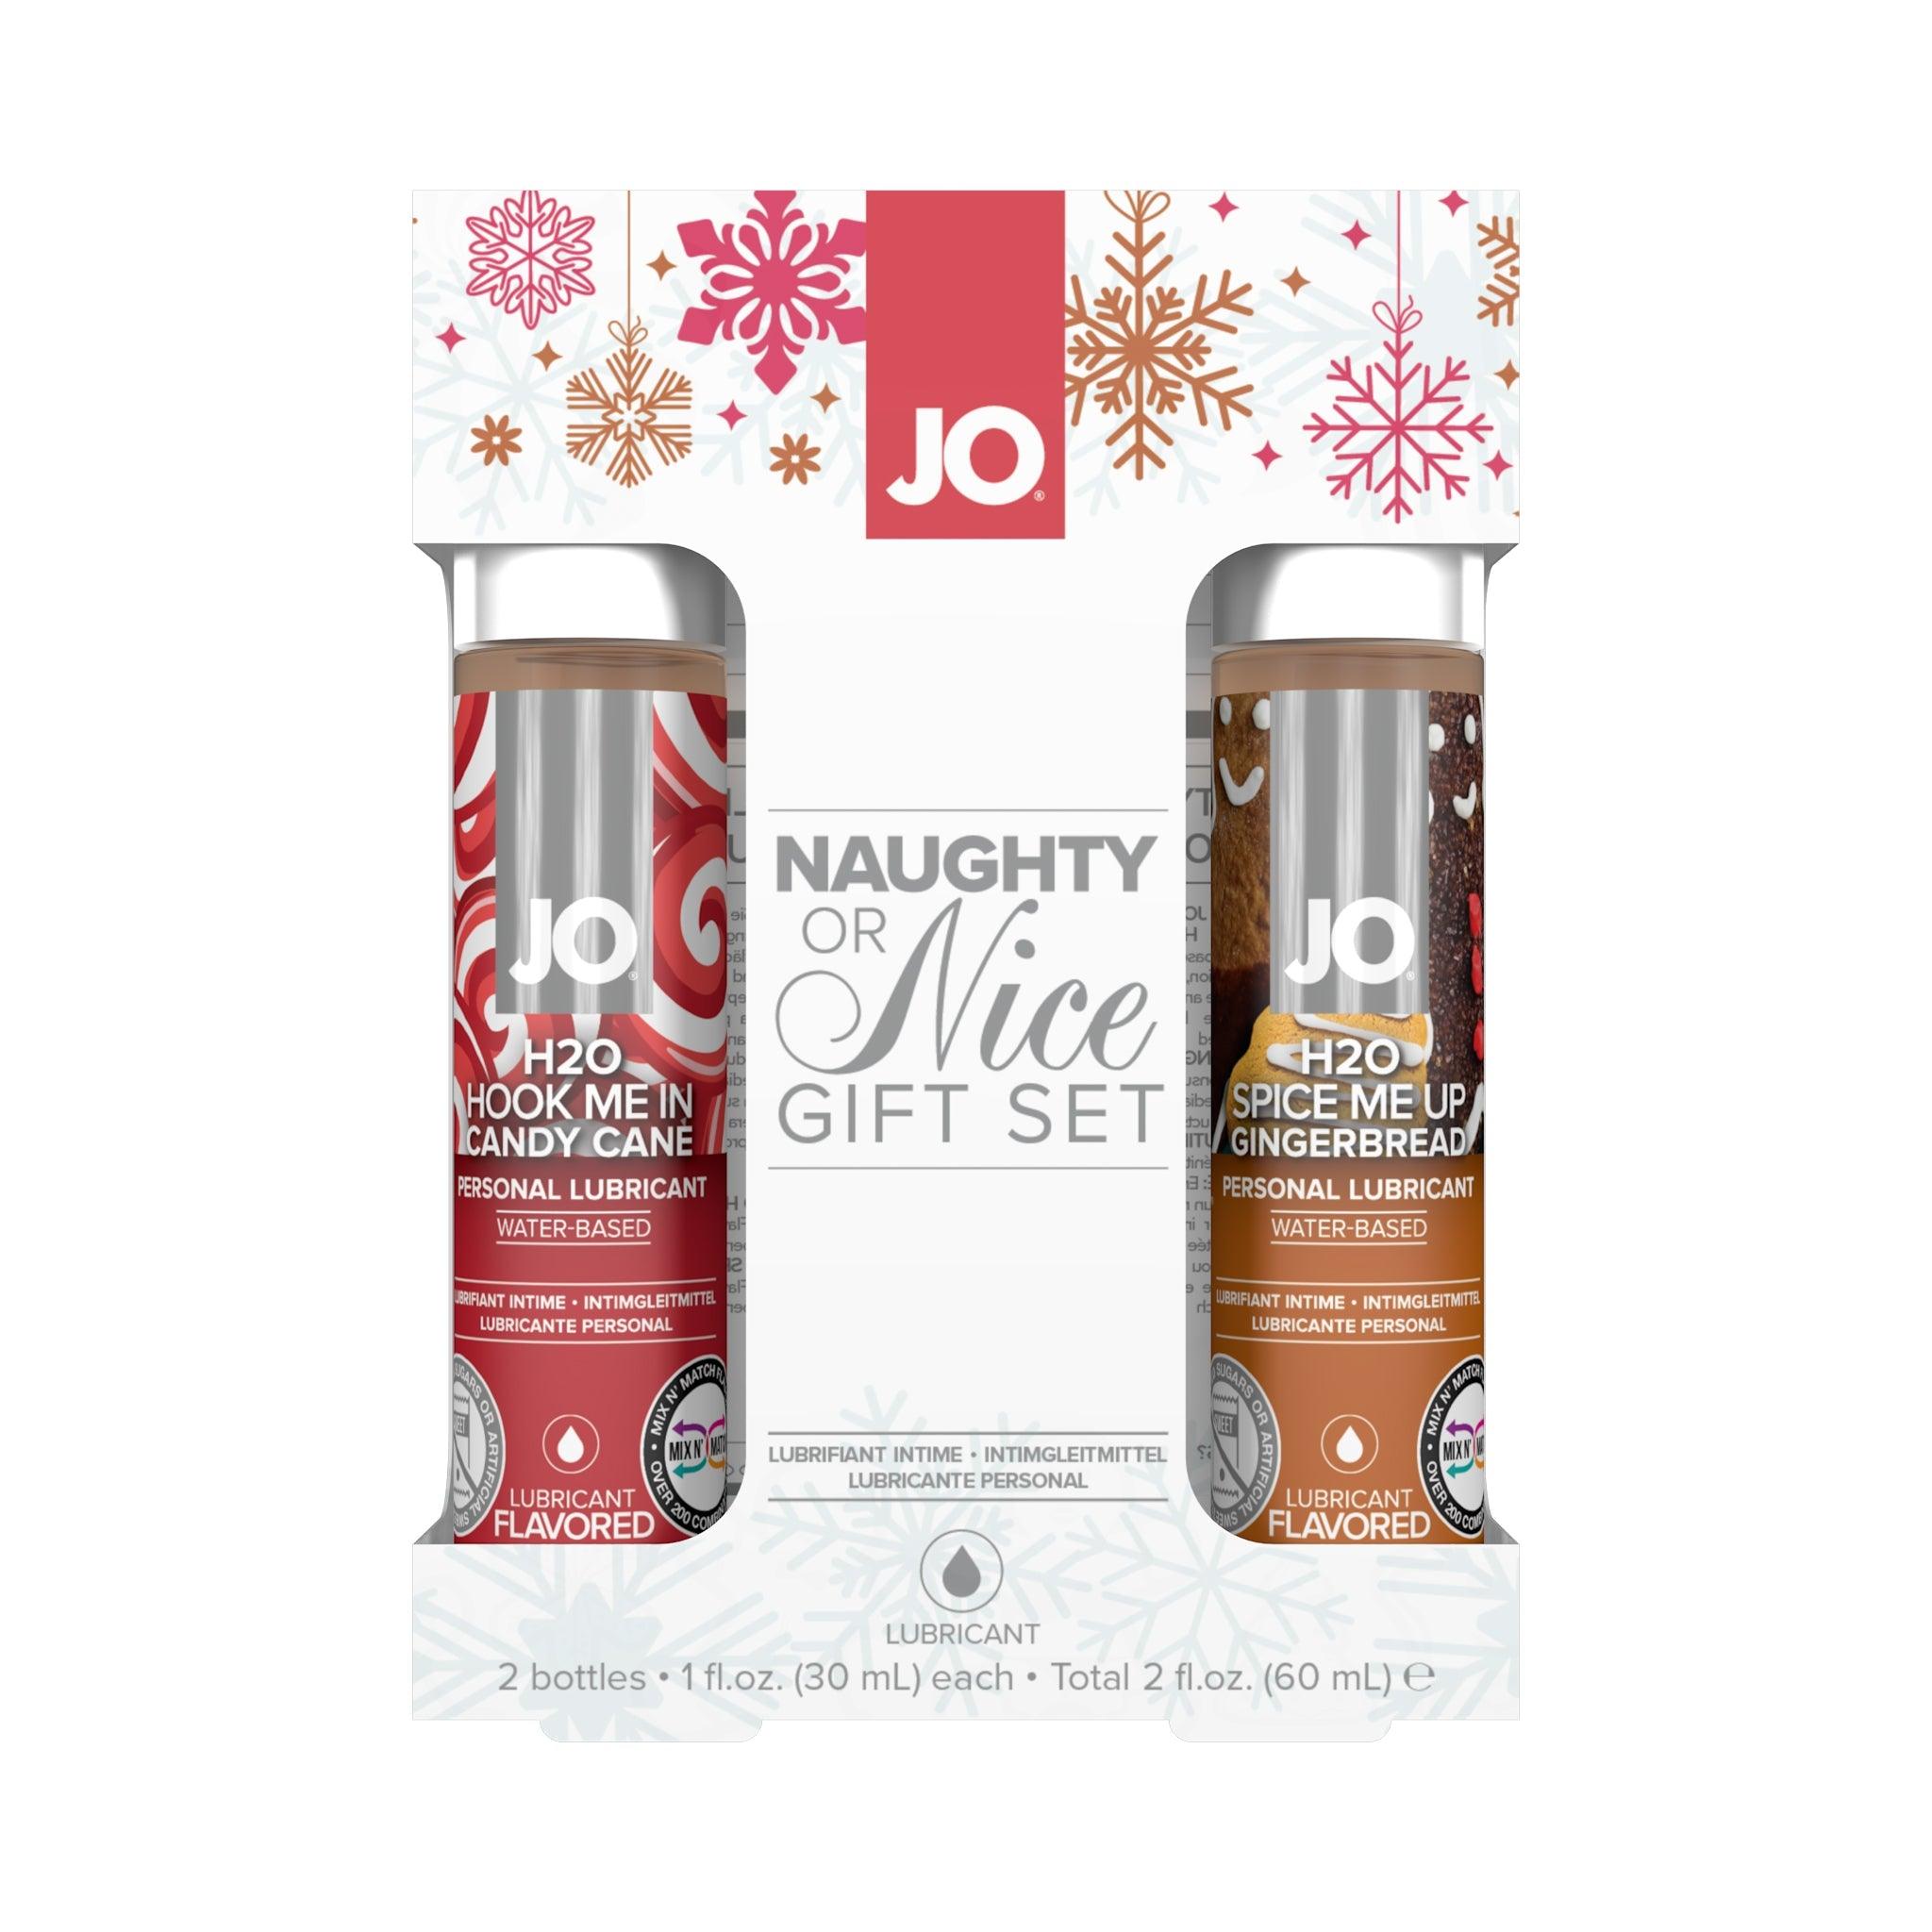 JO Naughty or Nice Gift Set Candy Cane & Gingerbread 1oz (60 mL) Each - CheapLubes.com